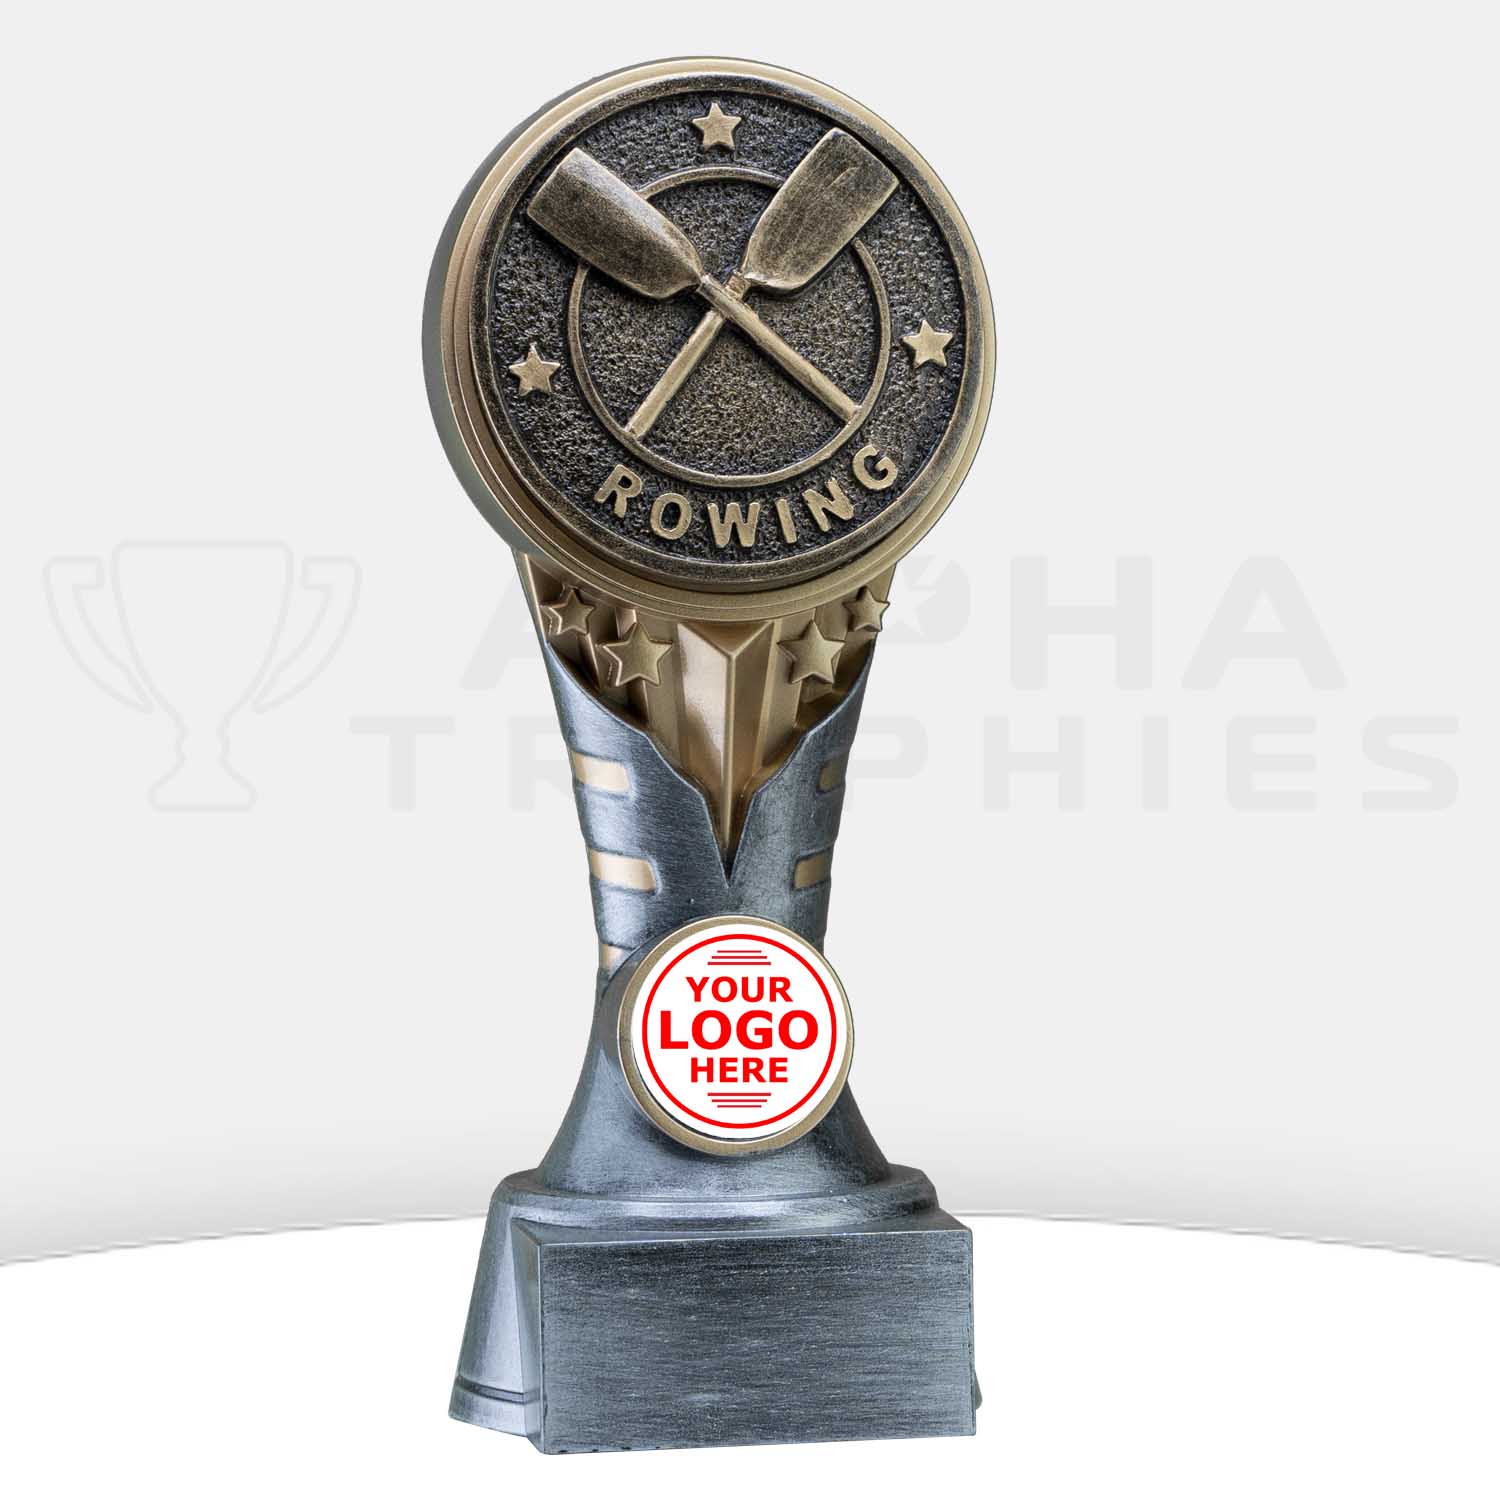 ikon-trophy-rowing-kn273a-front-with-logo